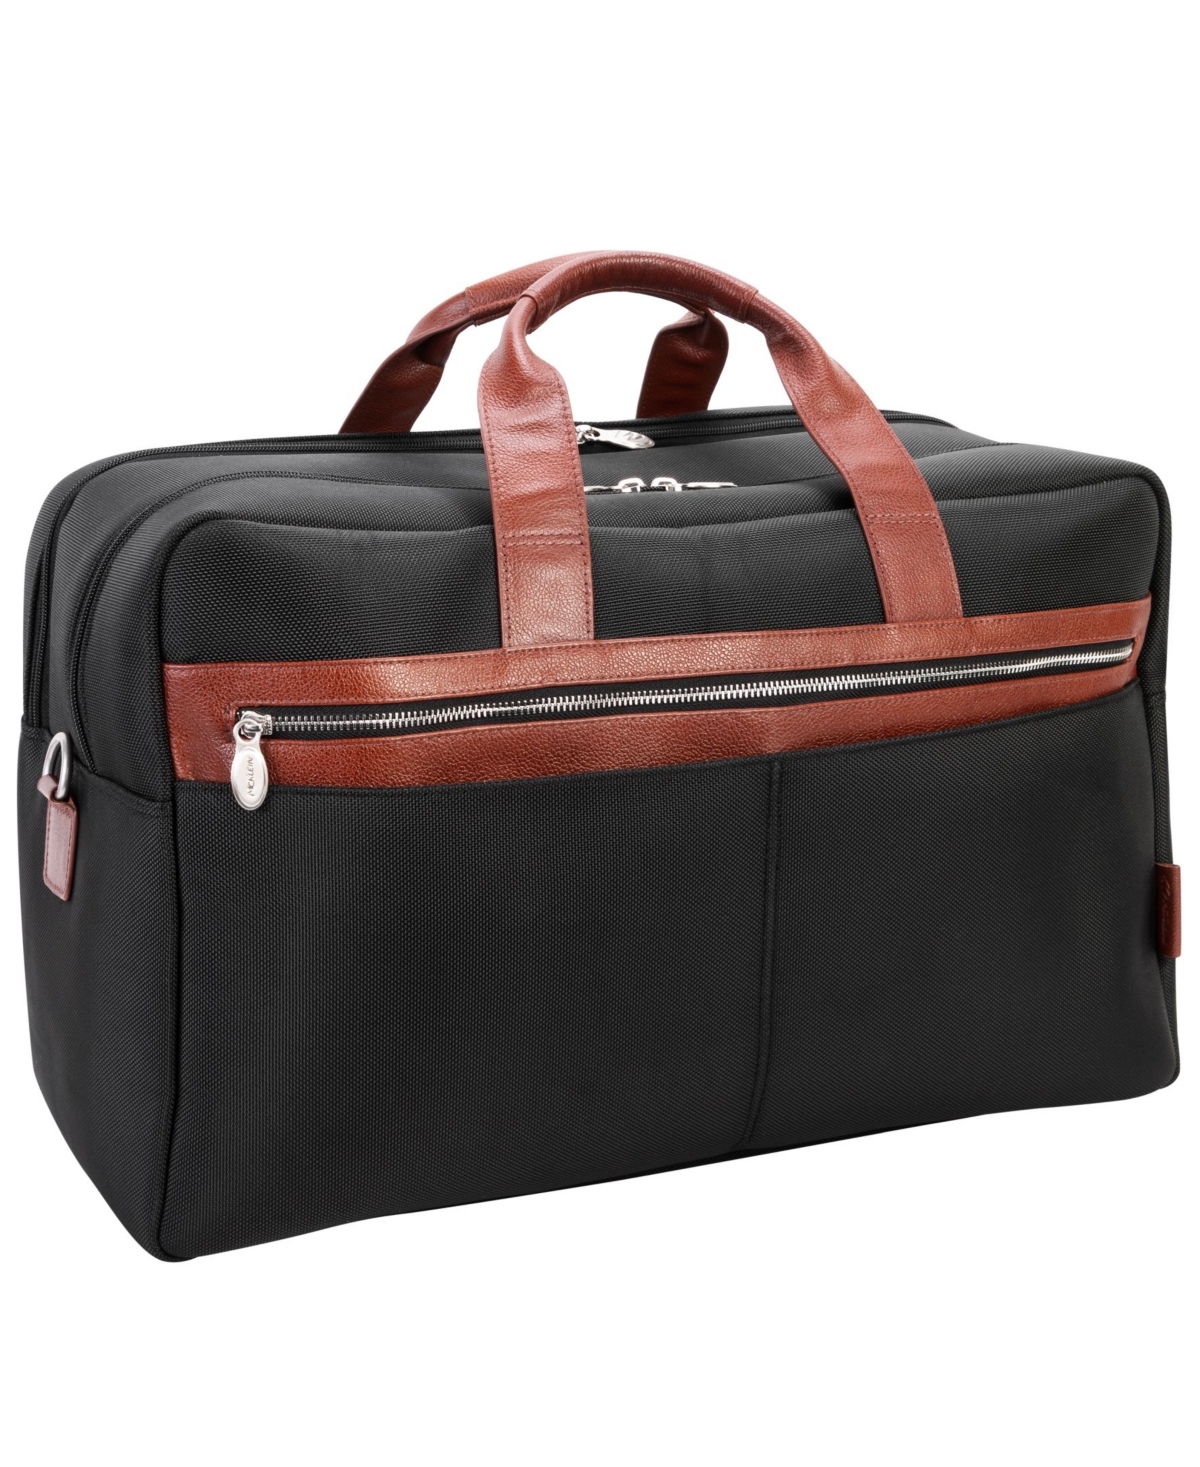 Wellington 21" Two-Tone Dual-Compartment Laptop Tablet Carry-All Duffel - Black